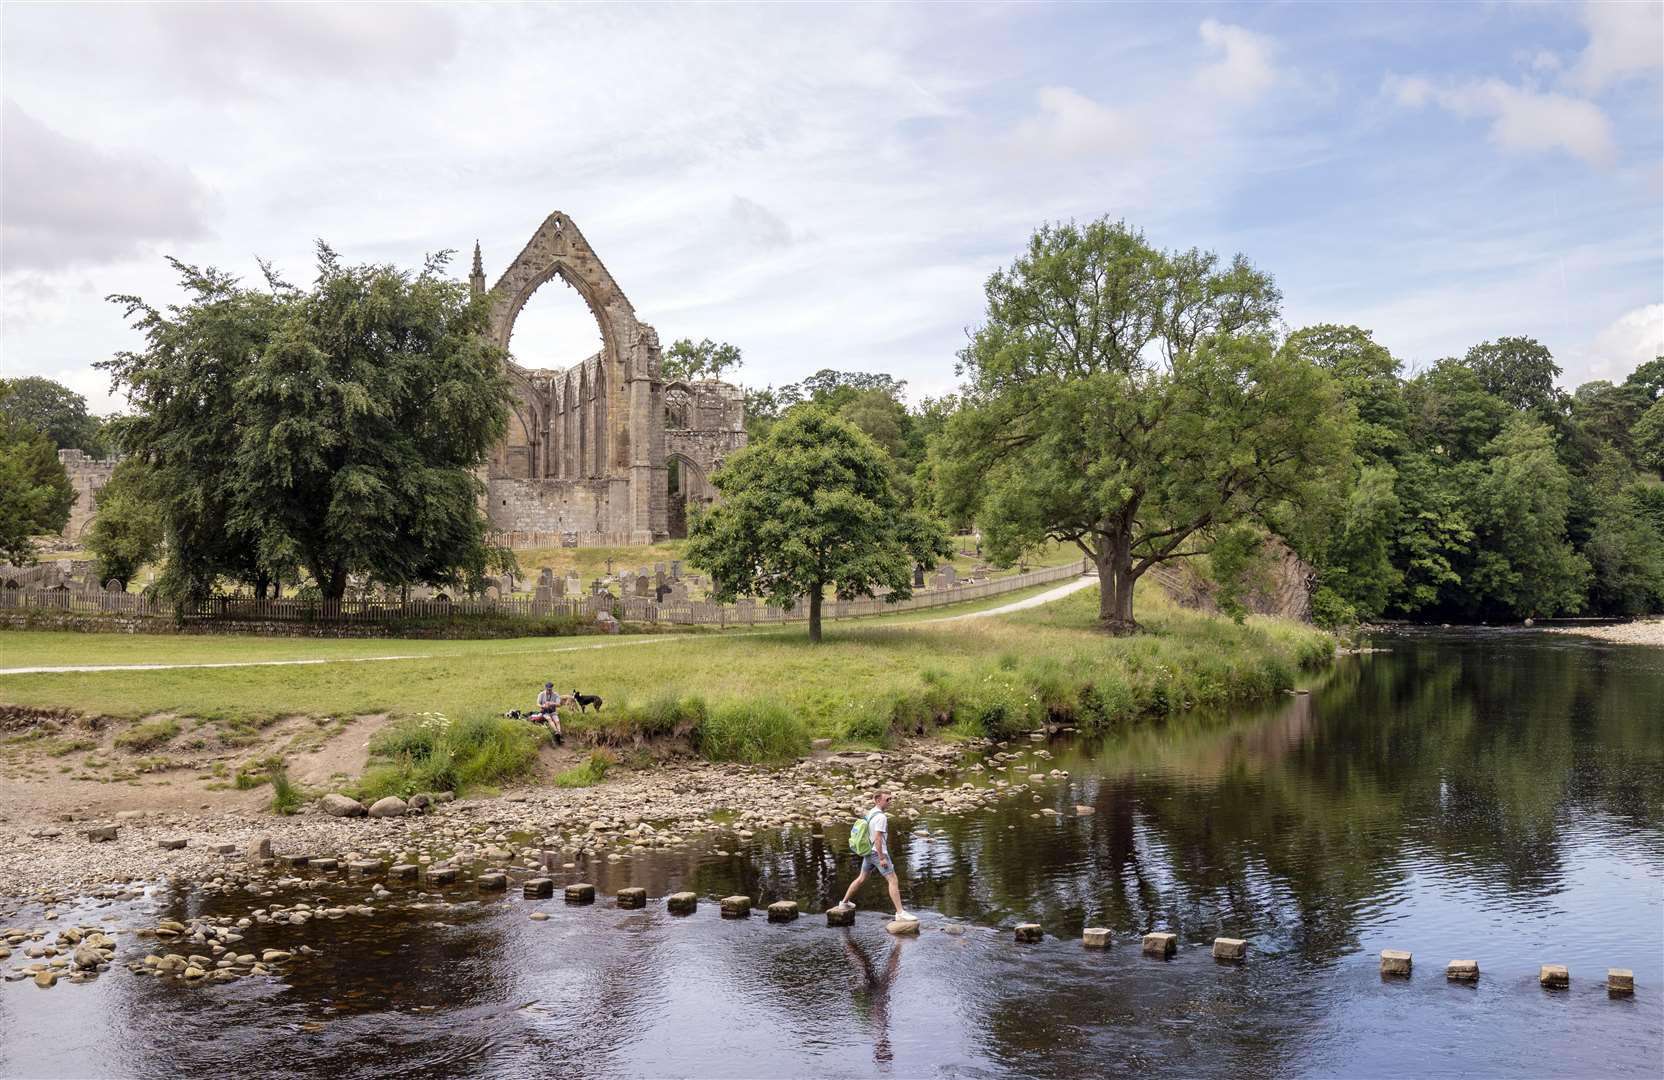 The sun was out at Bolton Abbey in North Yorkshire (Danny Lawson/PA)